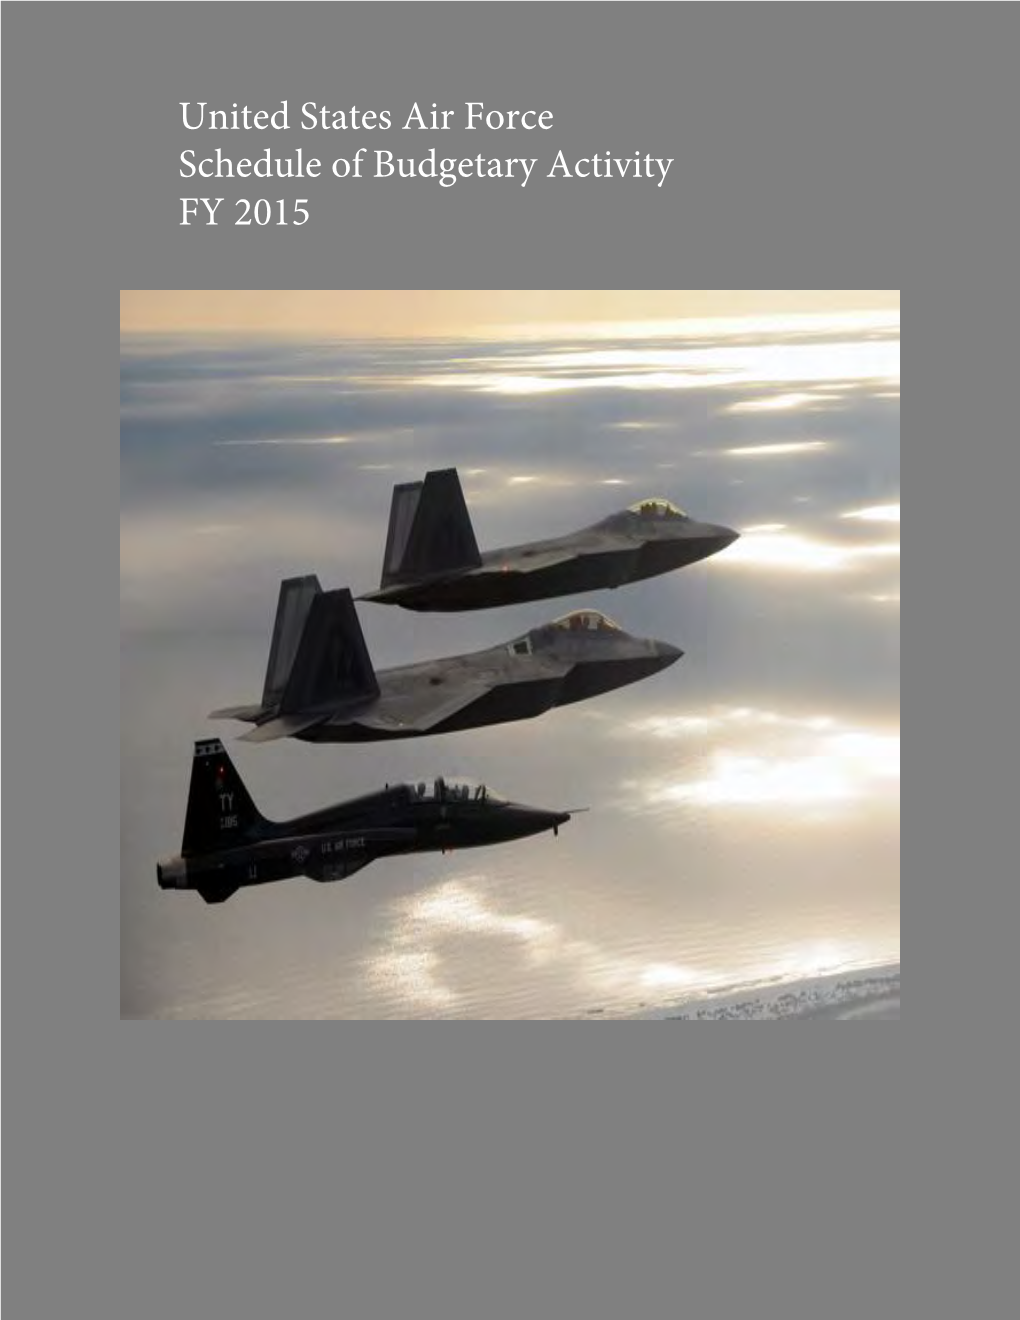 Report No. DODIG-2016-025, Within the United States Air Force Schedule of Budgetary Activity FY 2015